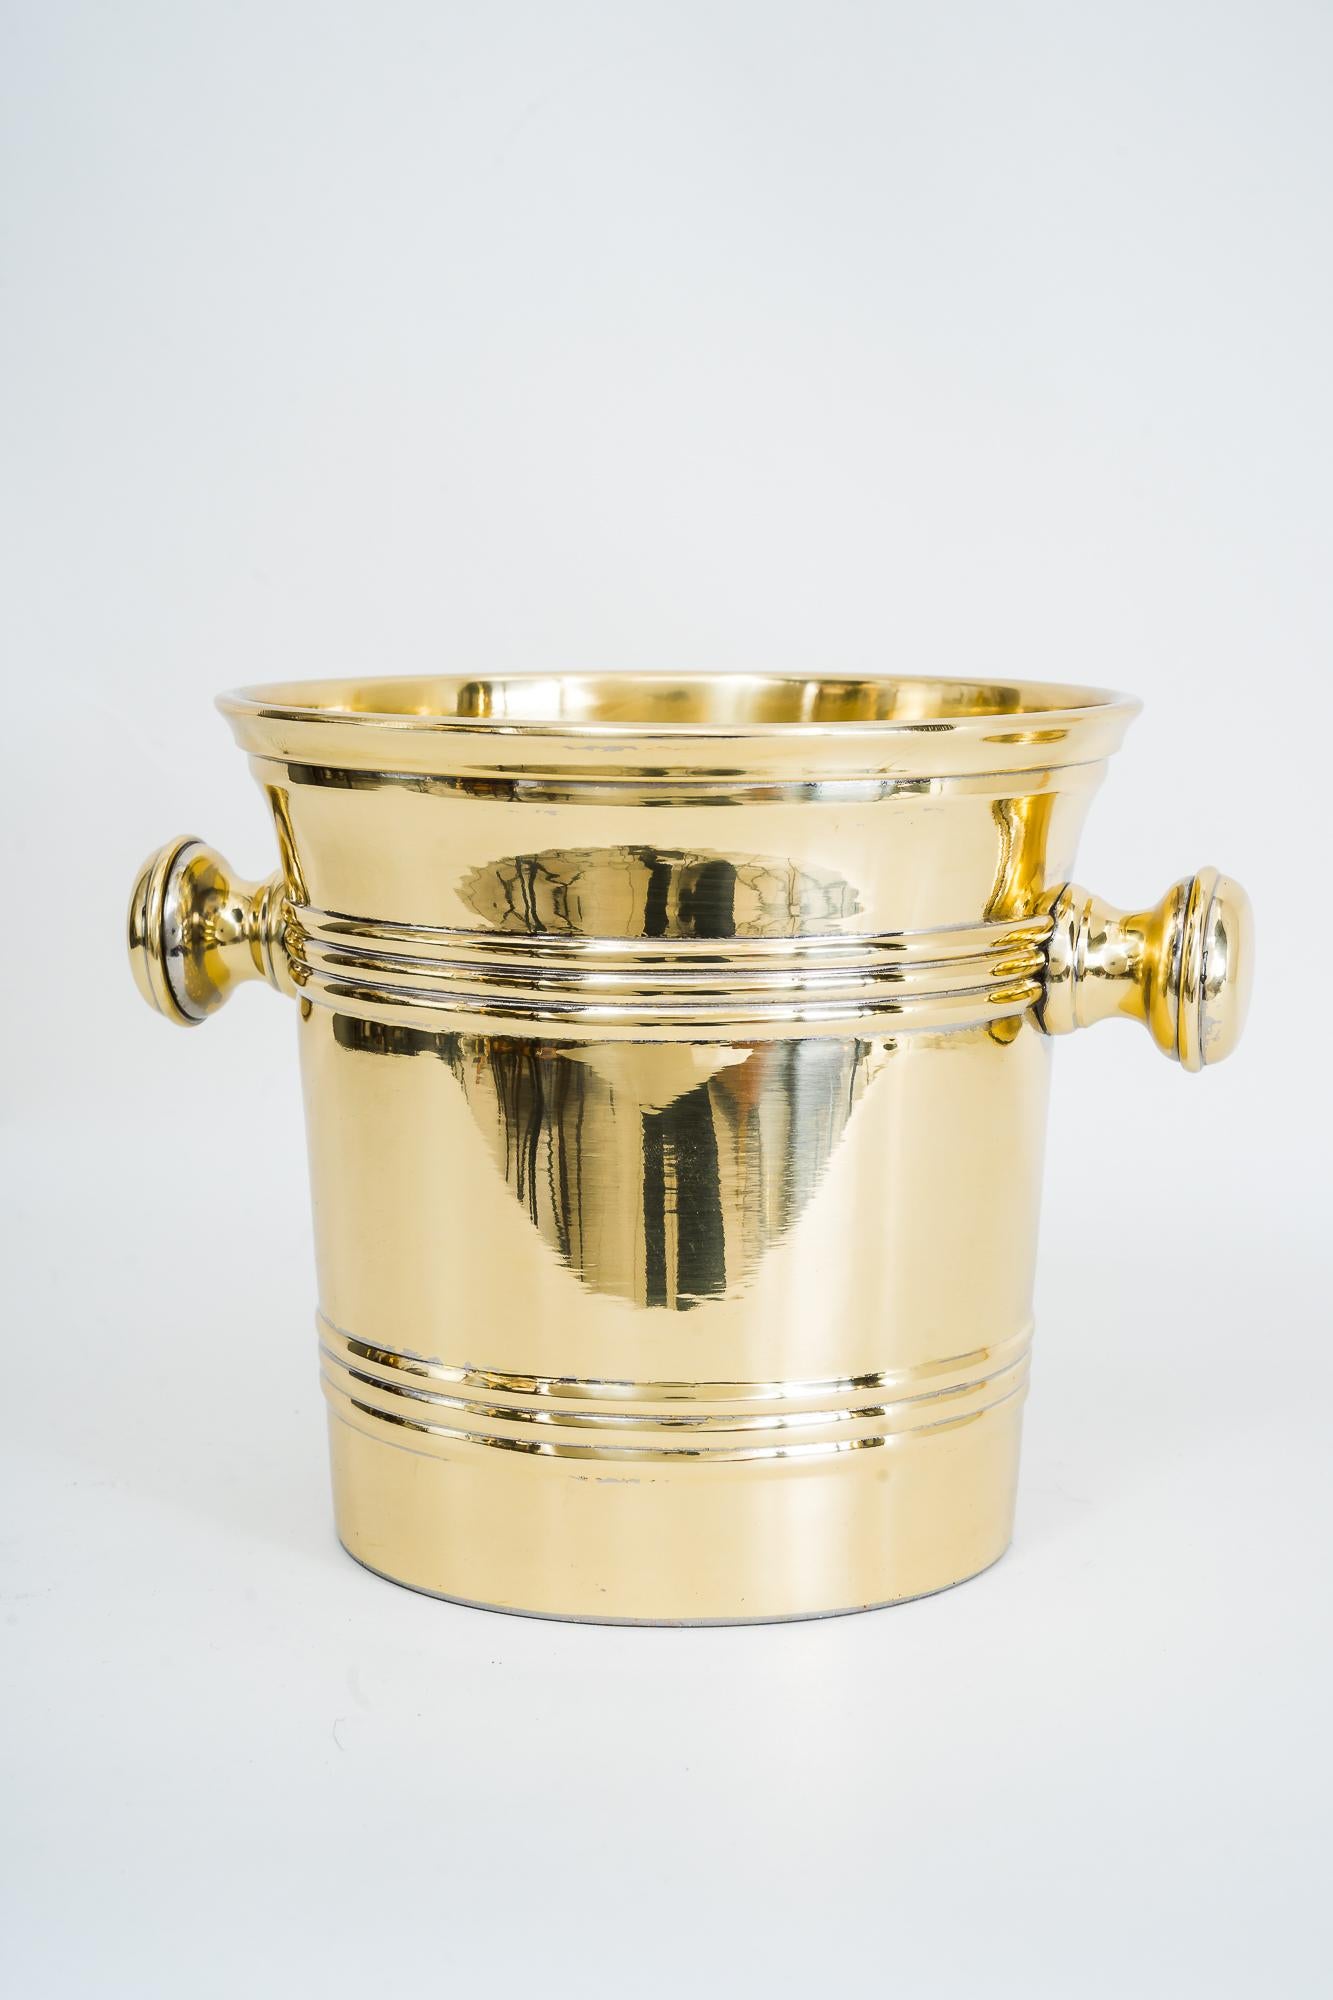 Champagne bucket around 1920s
Polished and stove enamelled
The bottle is only for the photoshooting ( not included ).